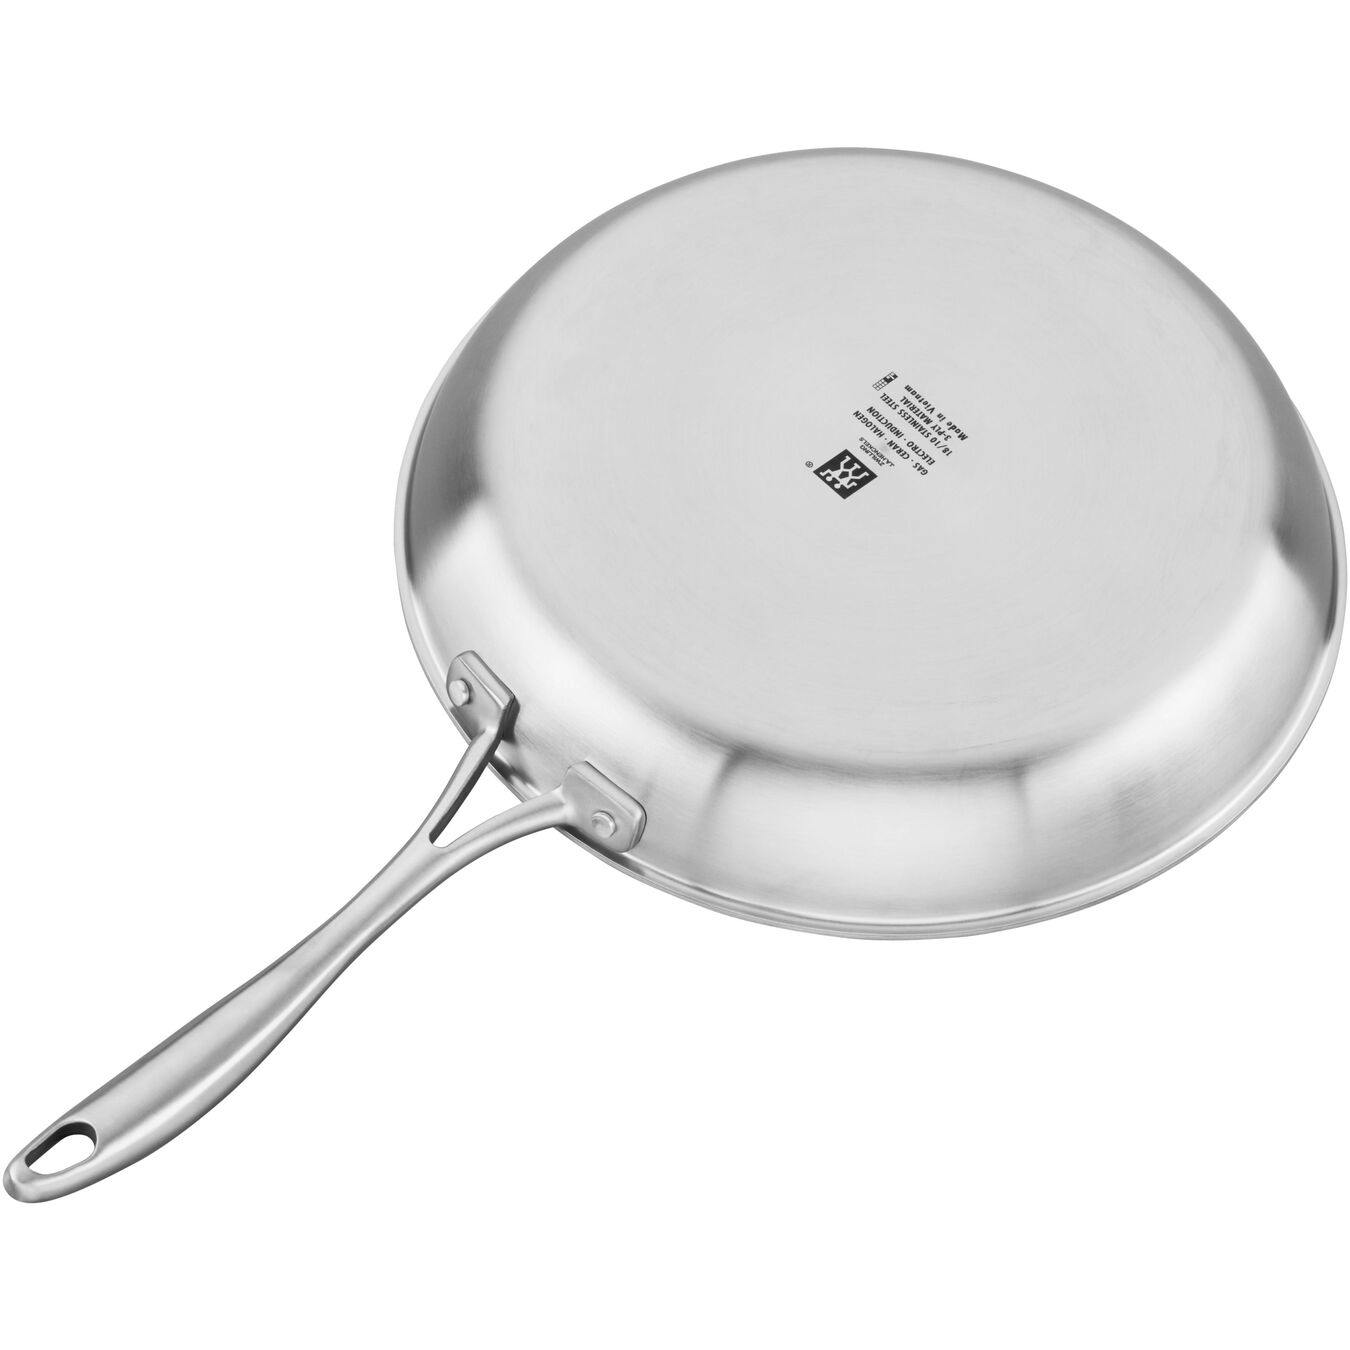 Zwilling Spirit 3-Ply 8 Stainless Steel Fry Pan